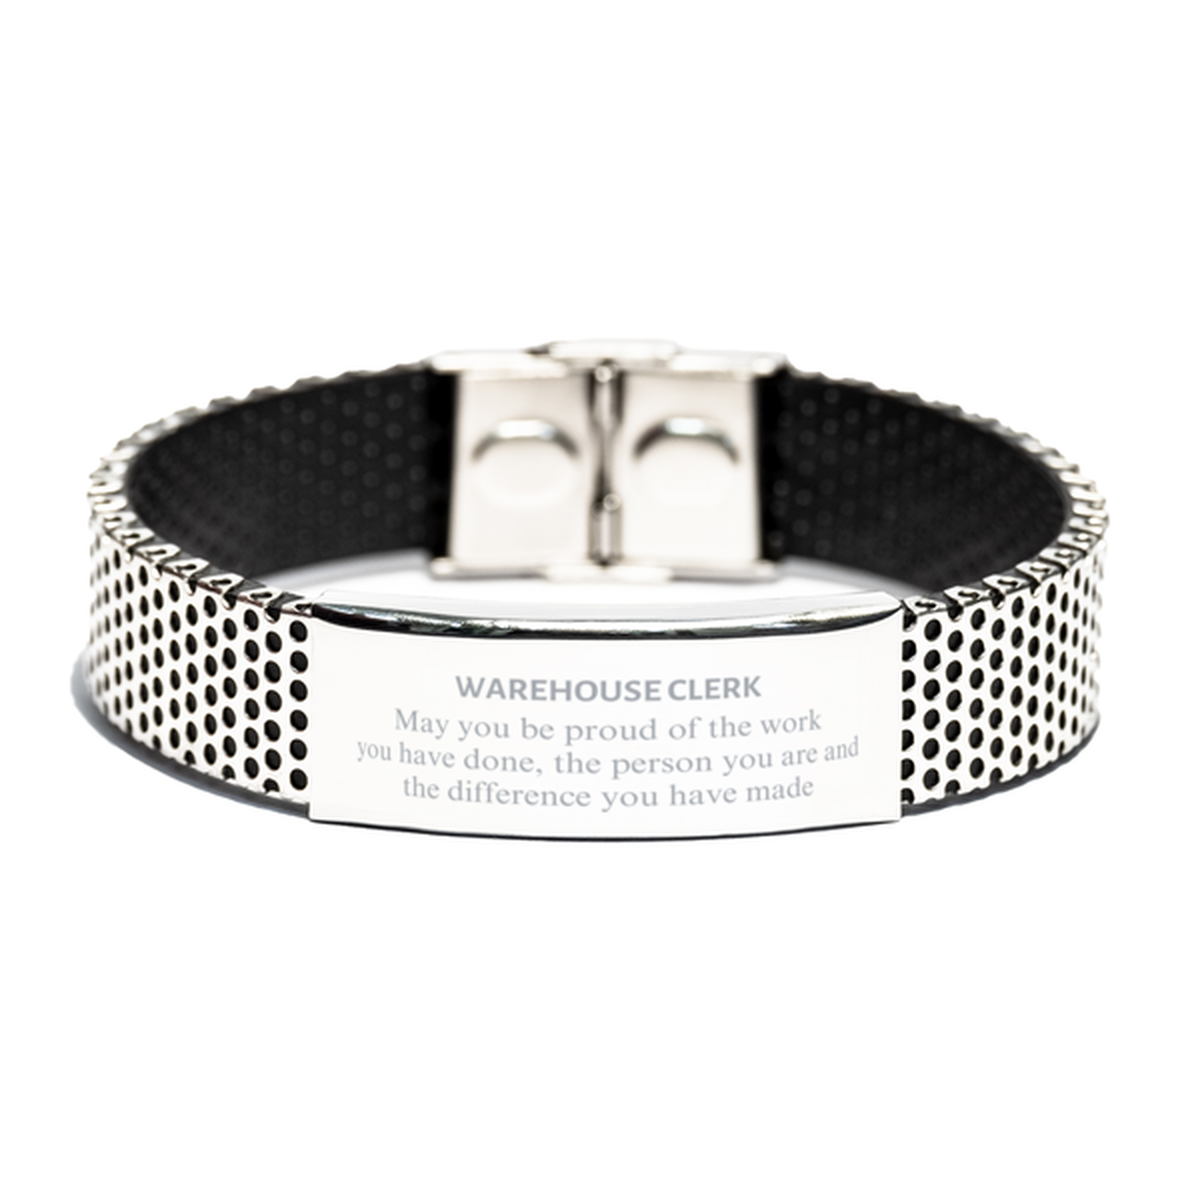 Warehouse Clerk May you be proud of the work you have done, Retirement Warehouse Clerk Stainless Steel Bracelet for Colleague Appreciation Gifts Amazing for Warehouse Clerk